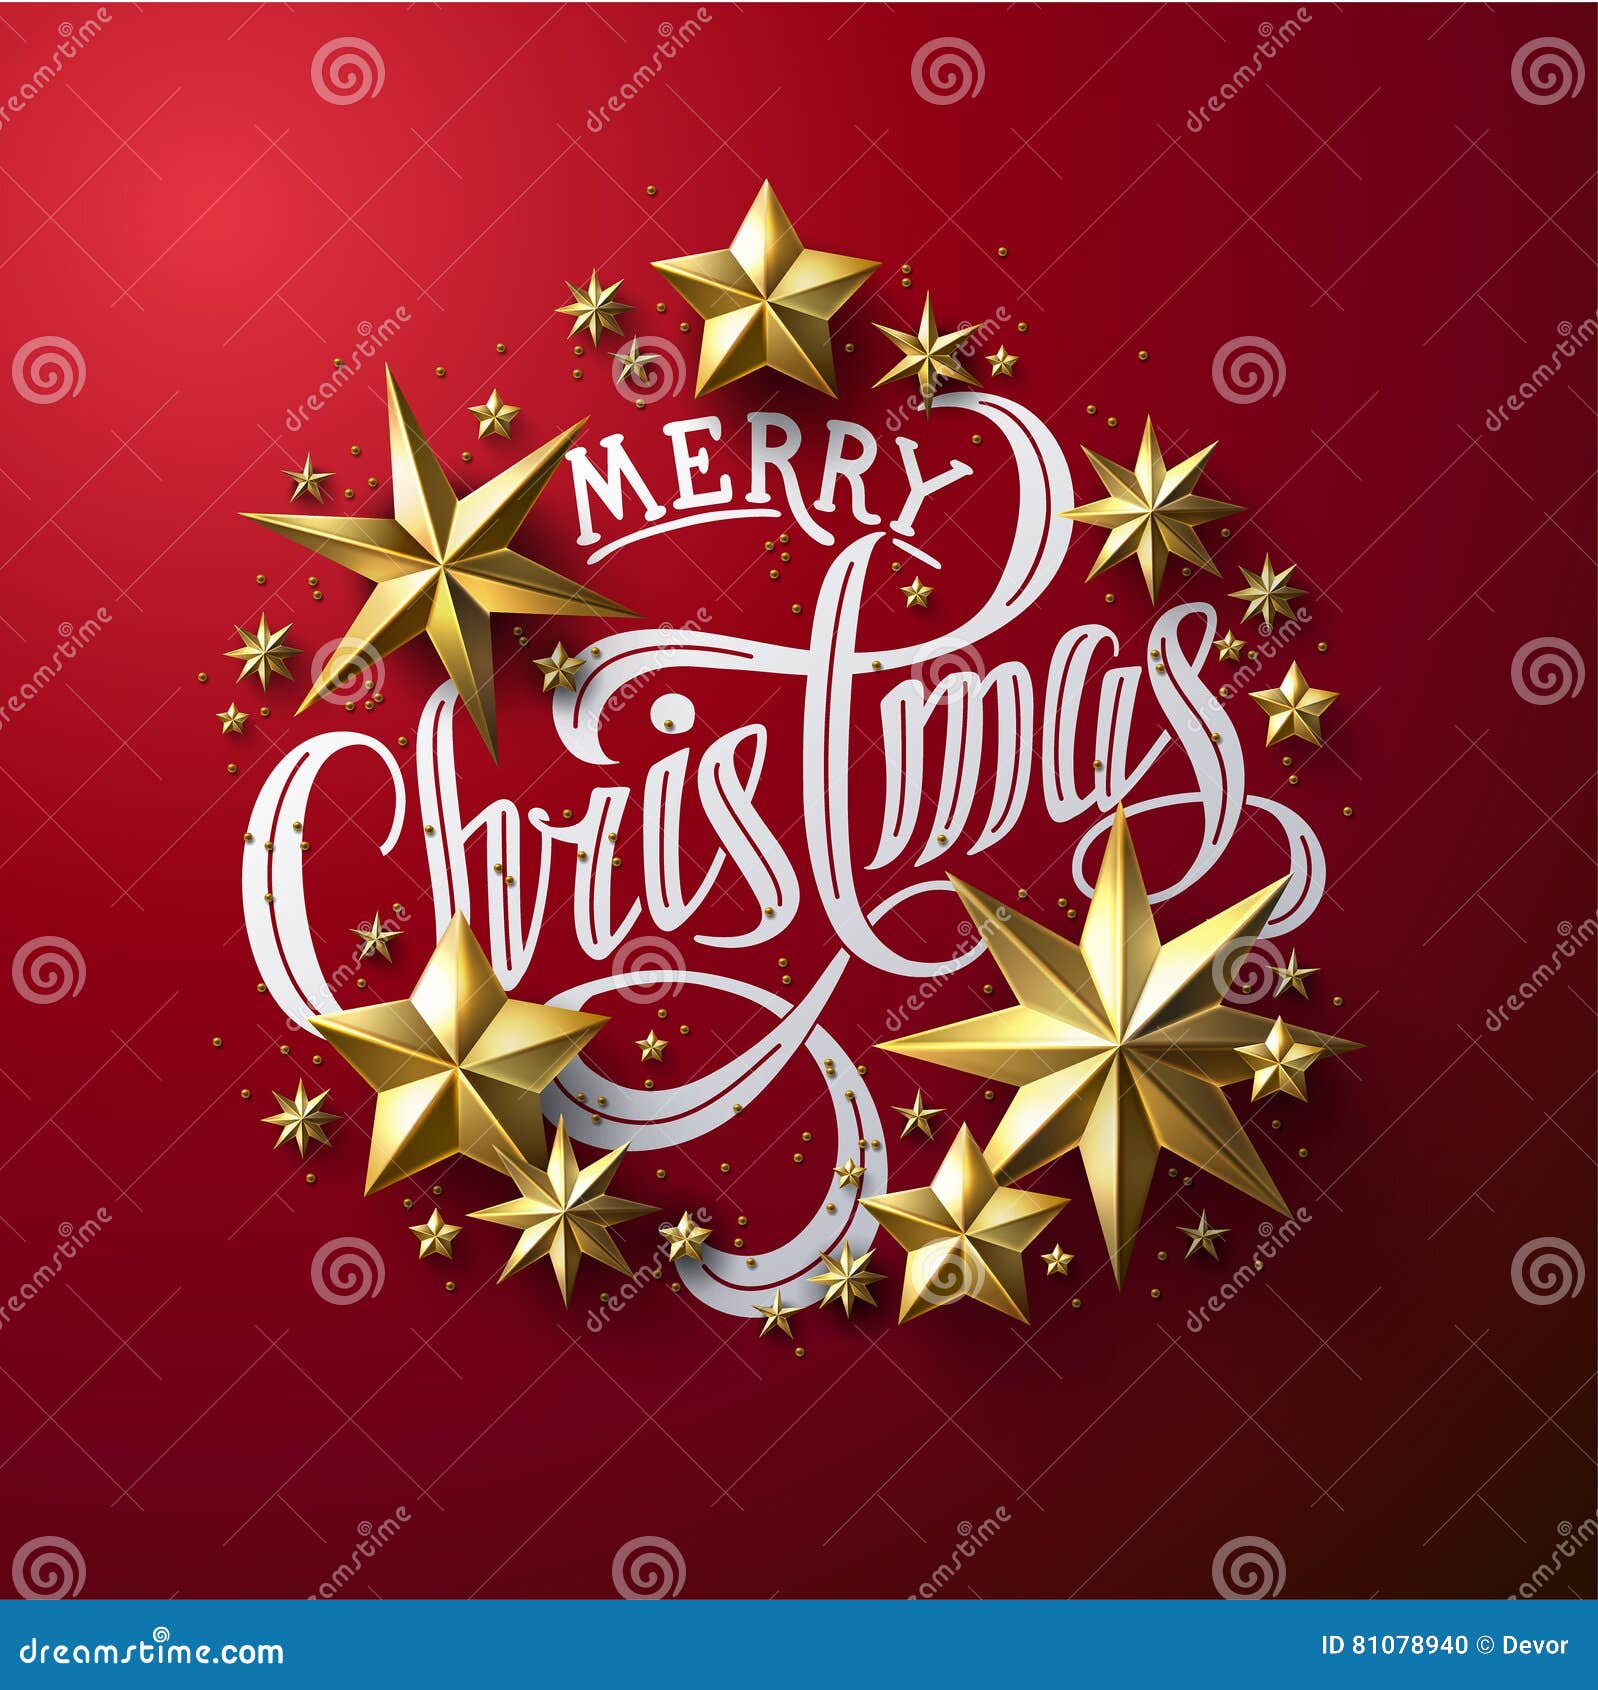 calligraphic `merry christmas` lettering decorated with gold stars.